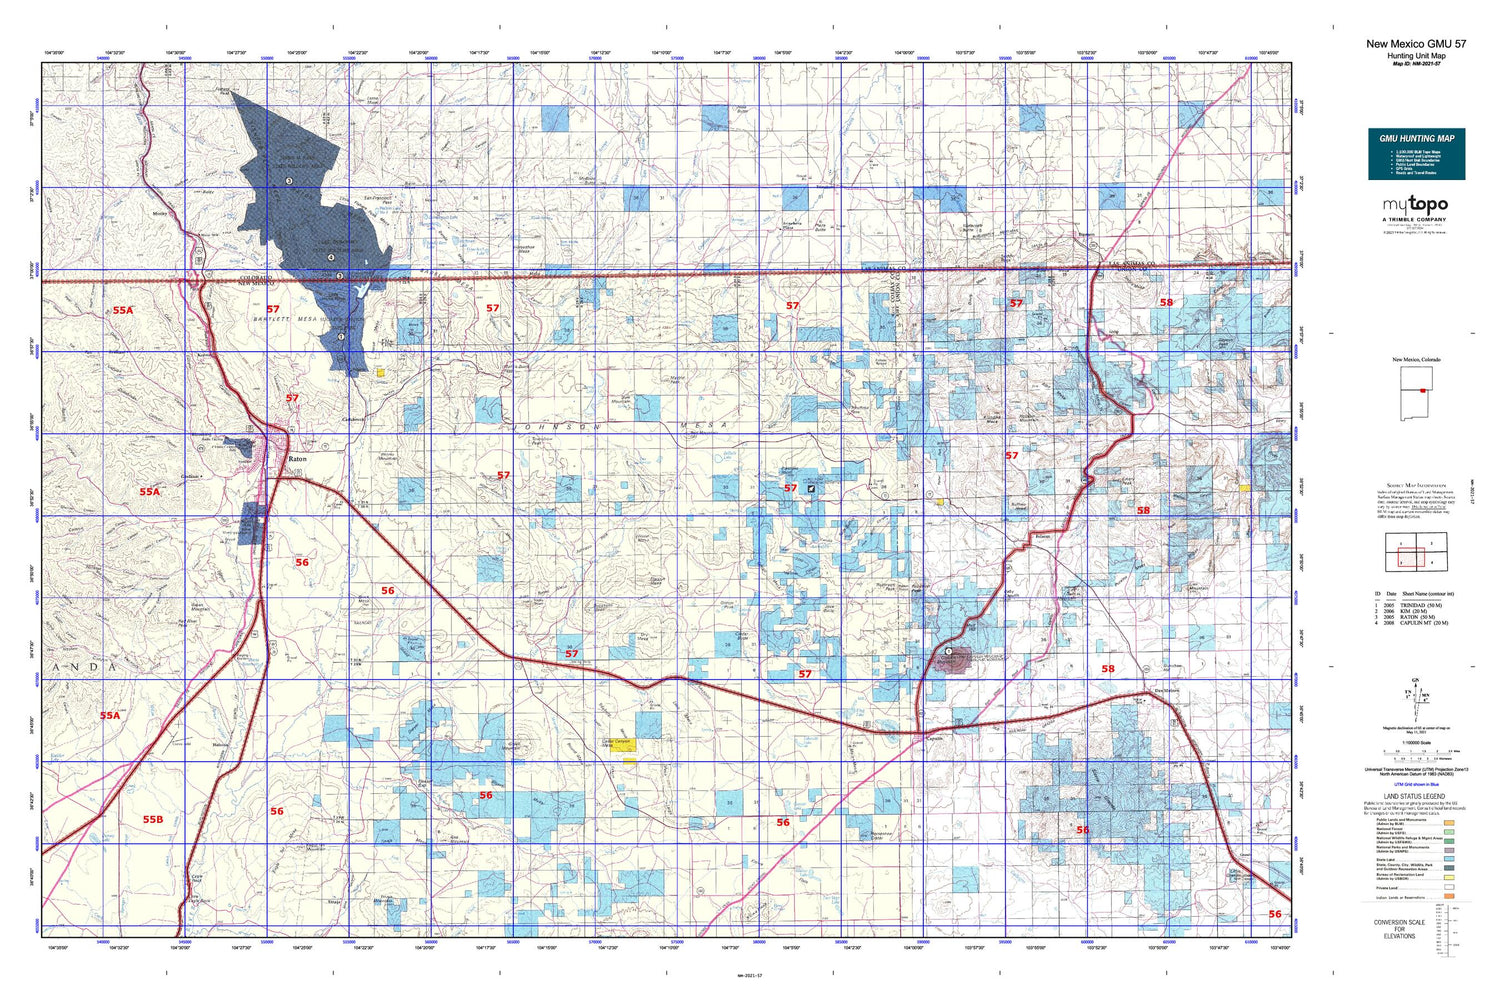 New Mexico GMU 57 Map Image